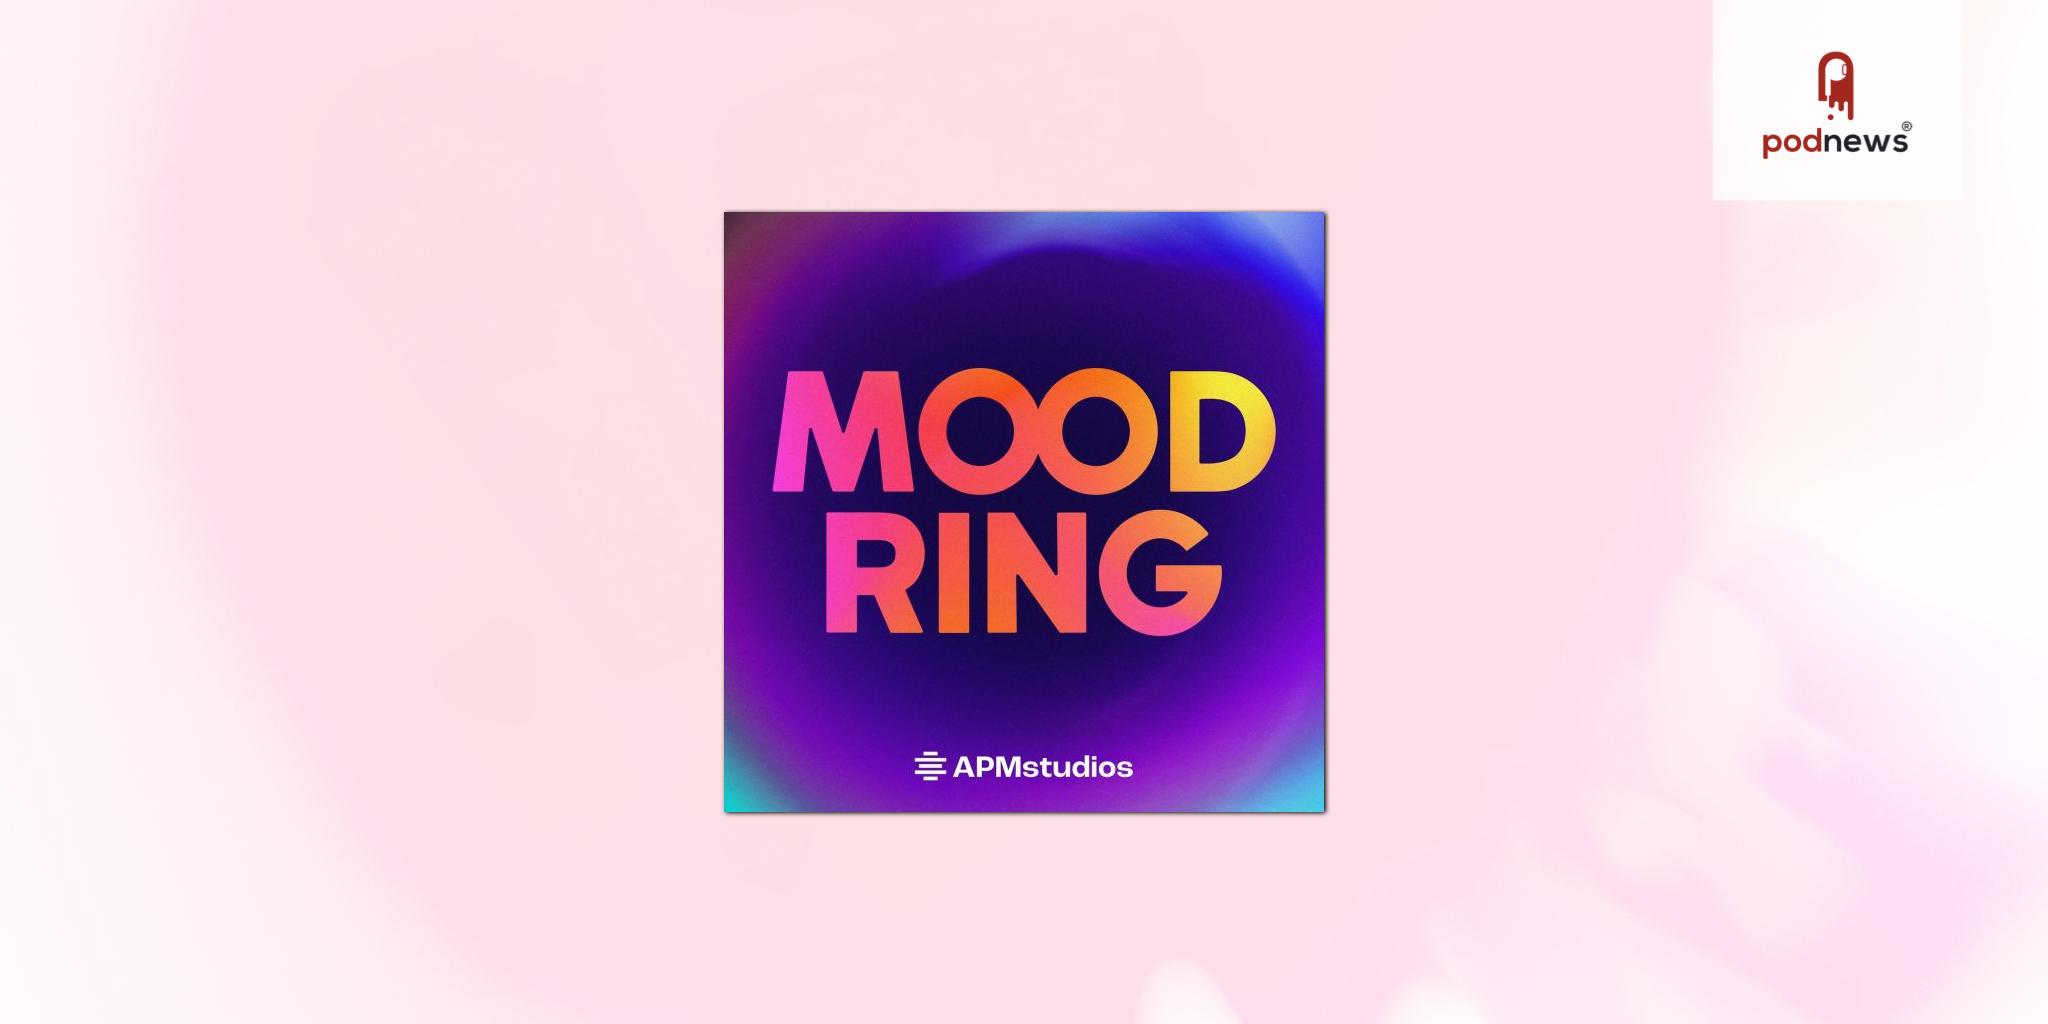 APM Studios launches new weekly podcast Mood Ring - bringing listeners a new spin on mental health